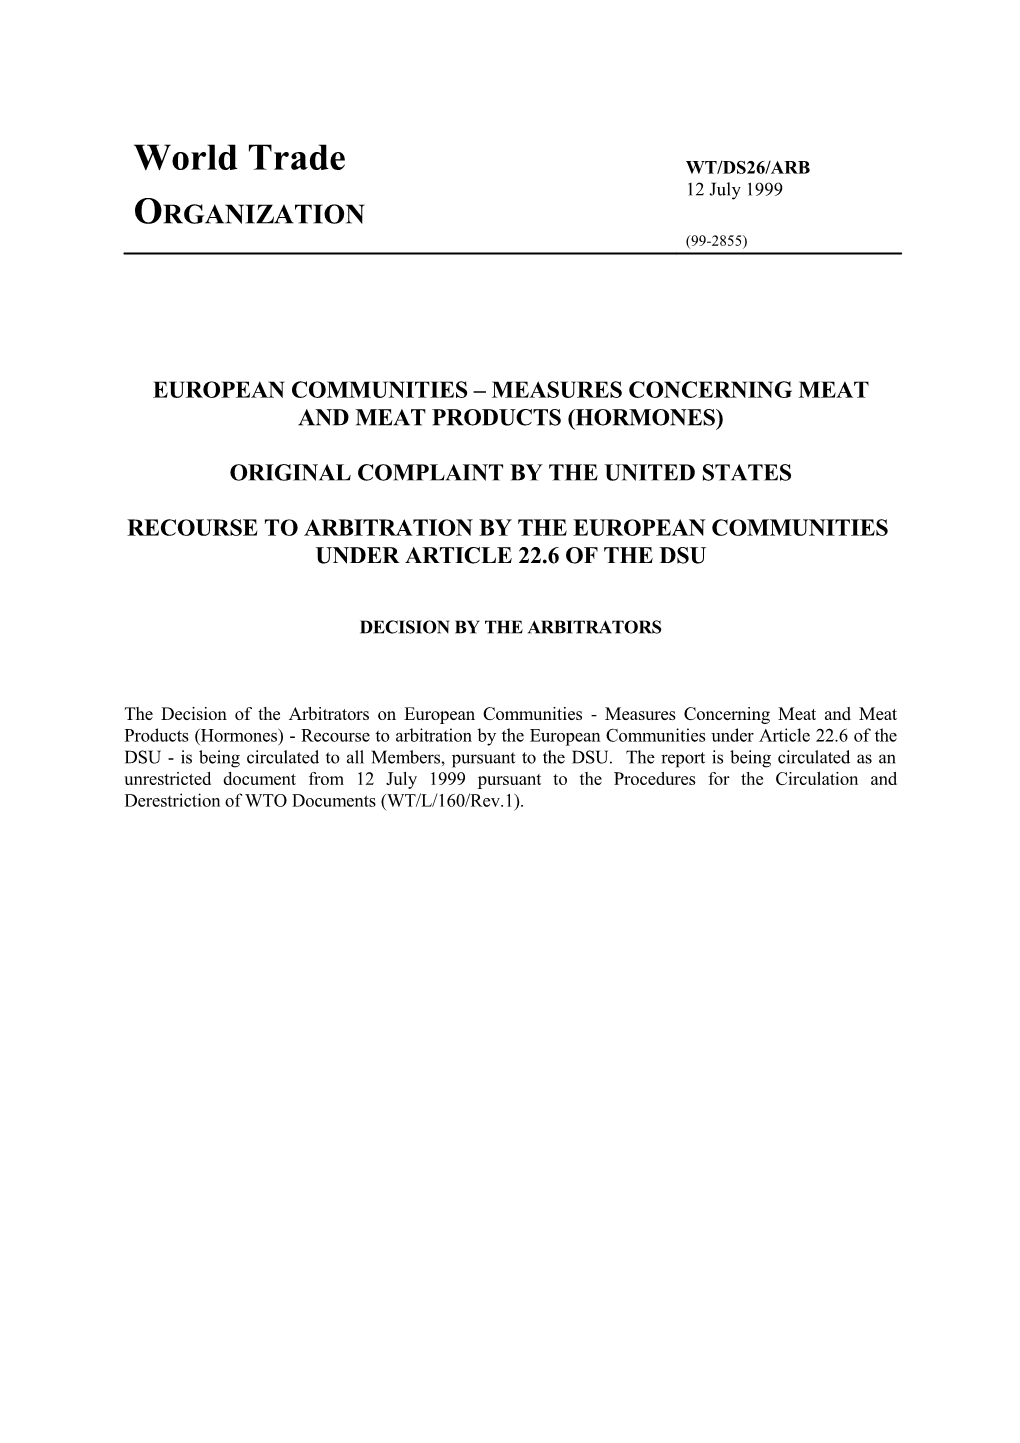 European Communities Measures Concerning Meat and Meat Products (Hormones)